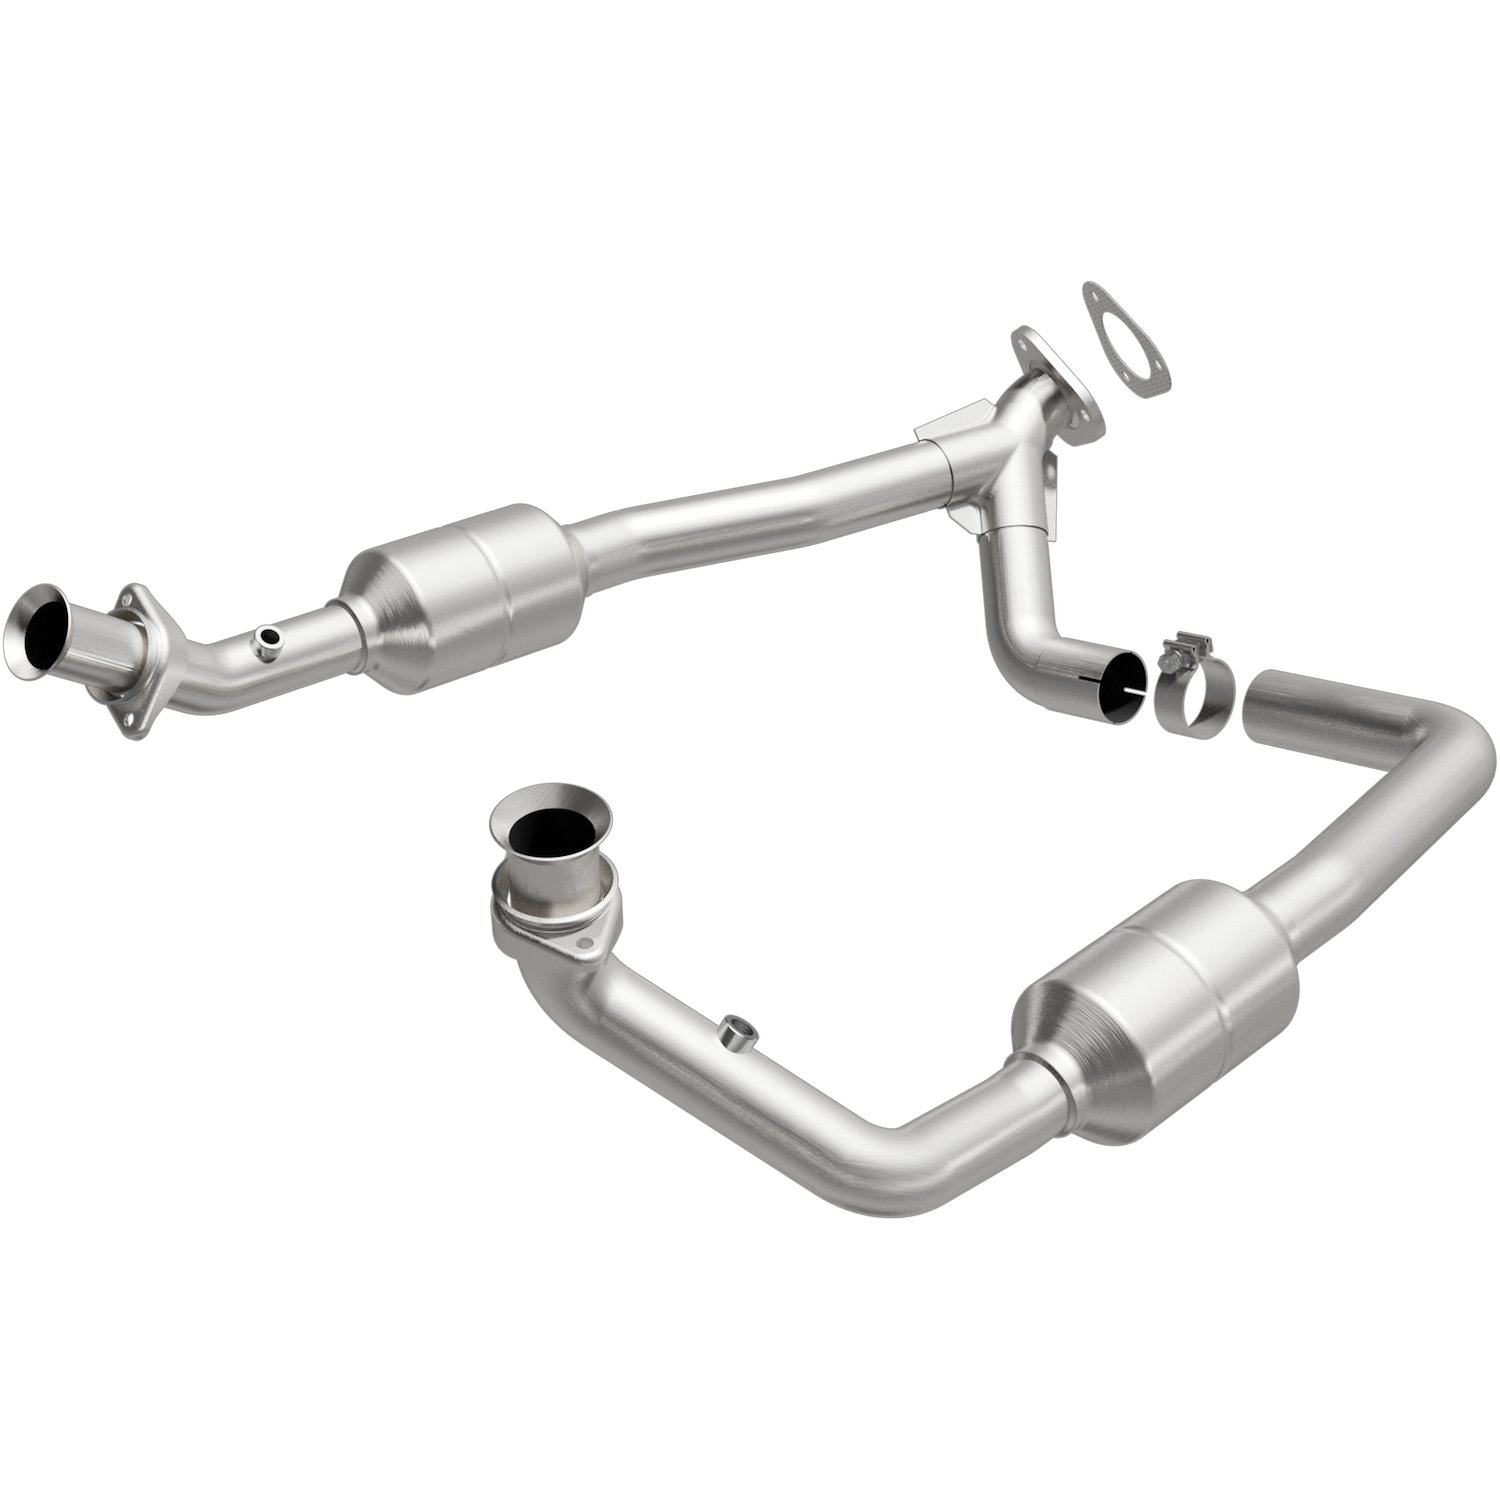 OEM Grade Federal / EPA Compliant Direct-Fit Catalytic Converter 51378